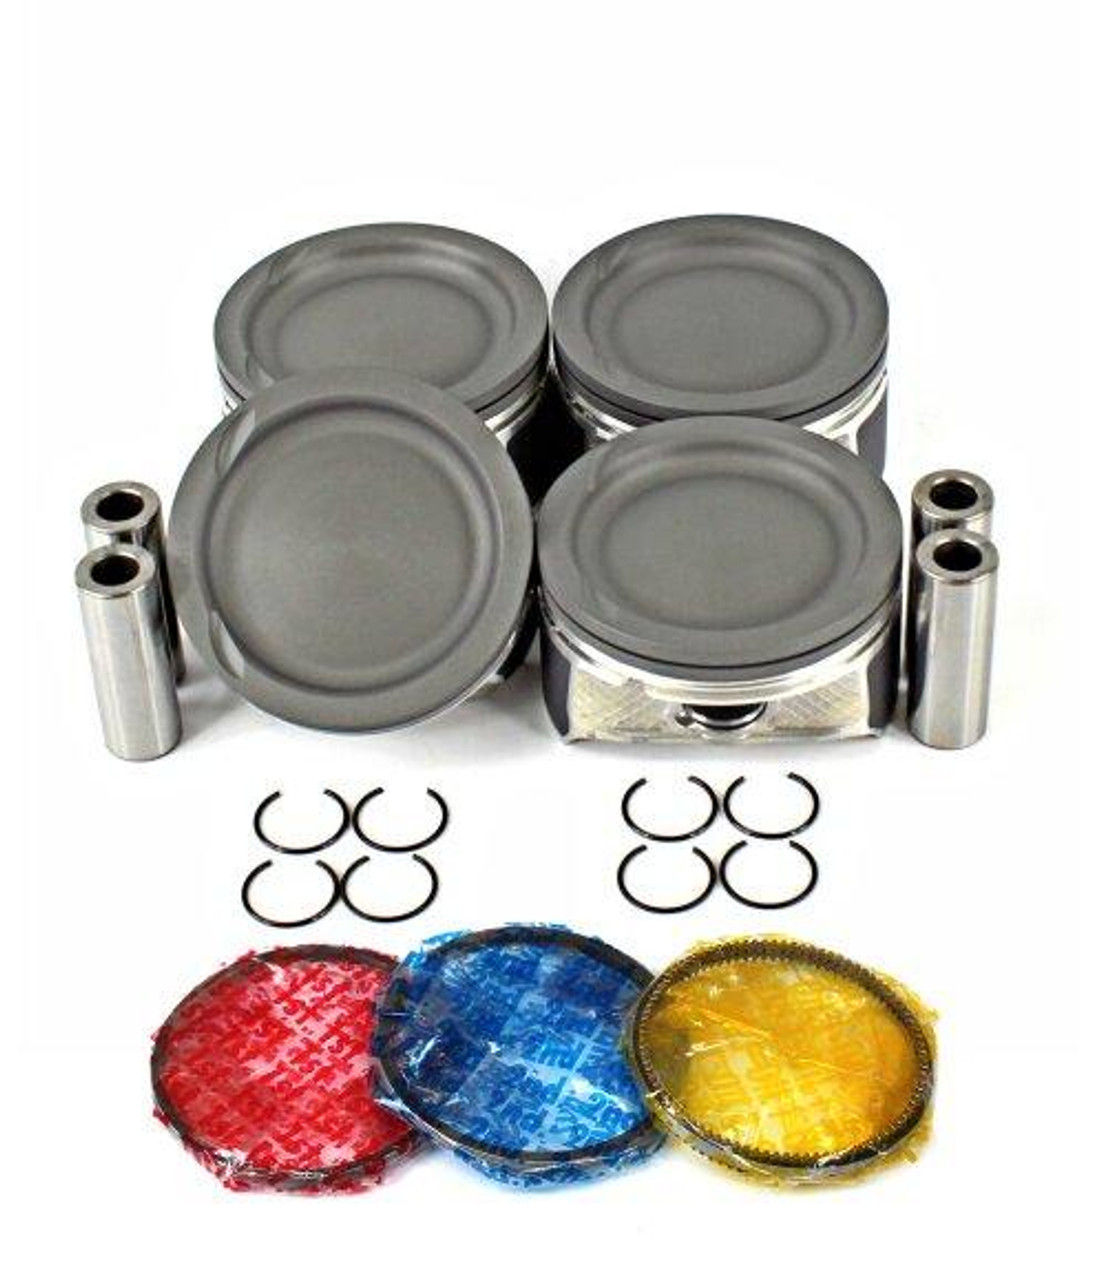 Piston Set with Rings - 2016 Ford Escape 2.5L Engine Parts # PRK484ZE8